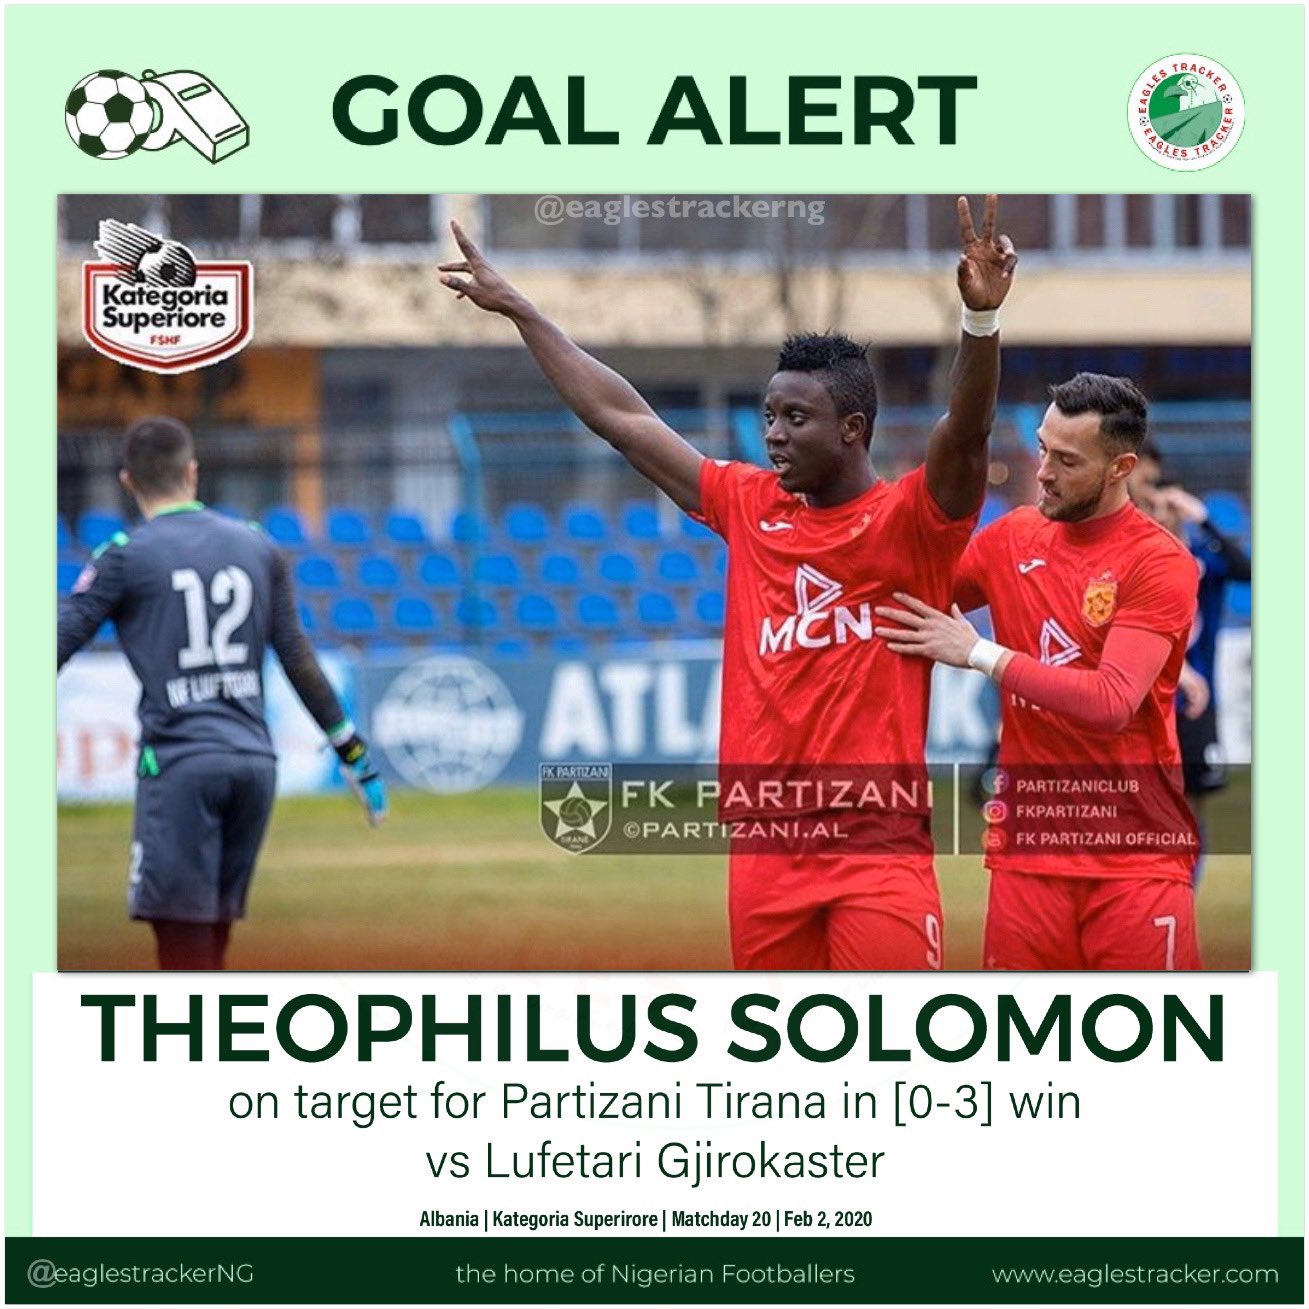 Home of Nigerian Football on X: Theophilus Solomon scored the winning goal  for #fk #partizani in their [1-2] #Albania #kategoria #superiore win vs #kf  #tirana —————————————— More on  Link in  @eaglestrackerng